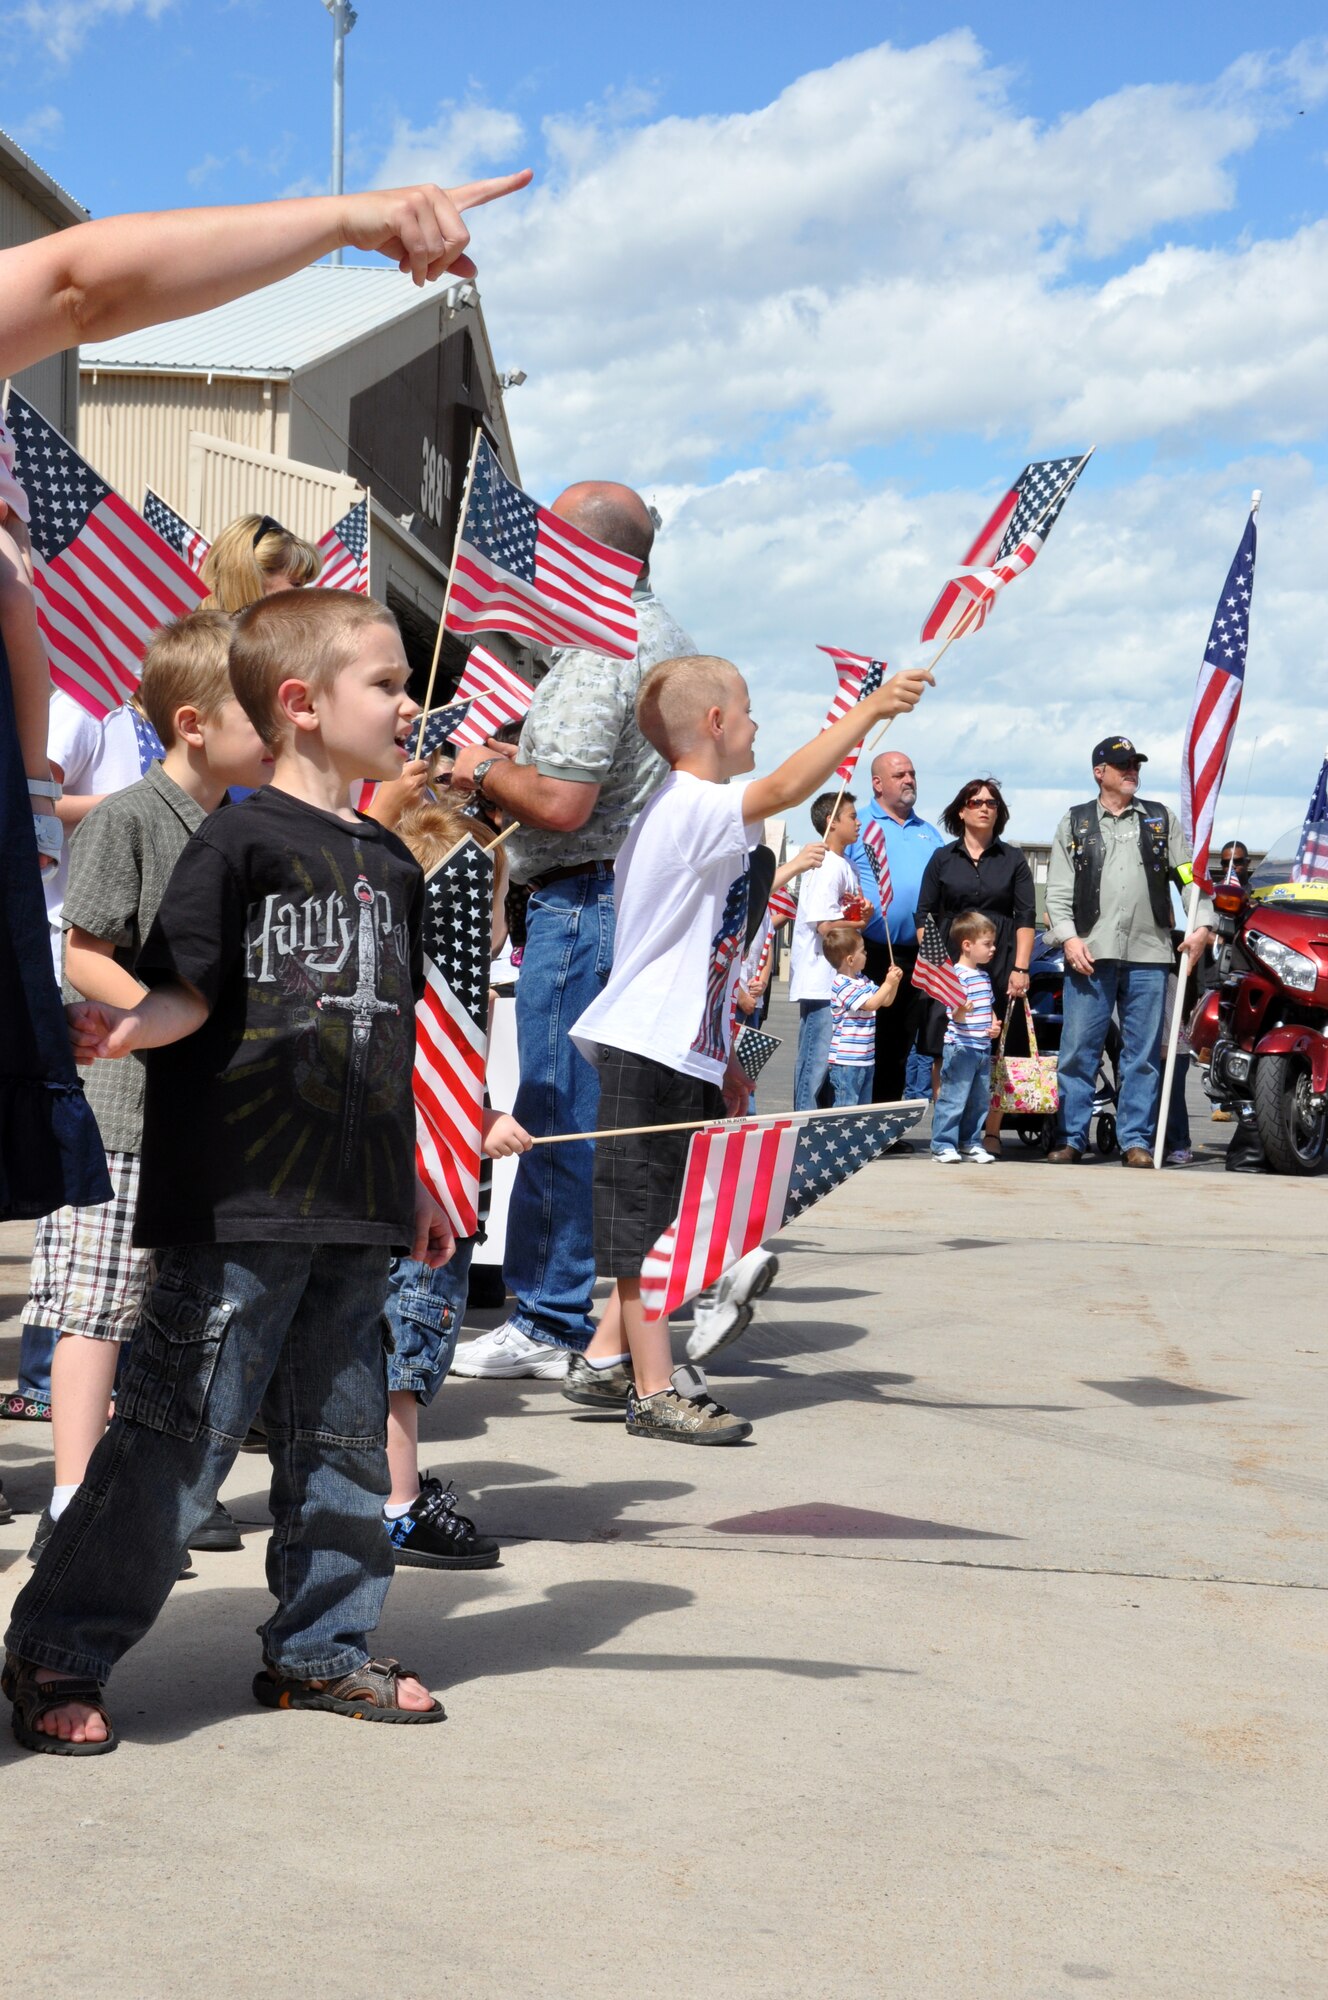 Eager children await the arrival of the parents and loved ones, some 300 Airmen from the 419th and 388th Fighter Wings who returned to Hill Air Force Base from Afghanistan May 28. (U.S. Air Force photo/Bryan Magaña)